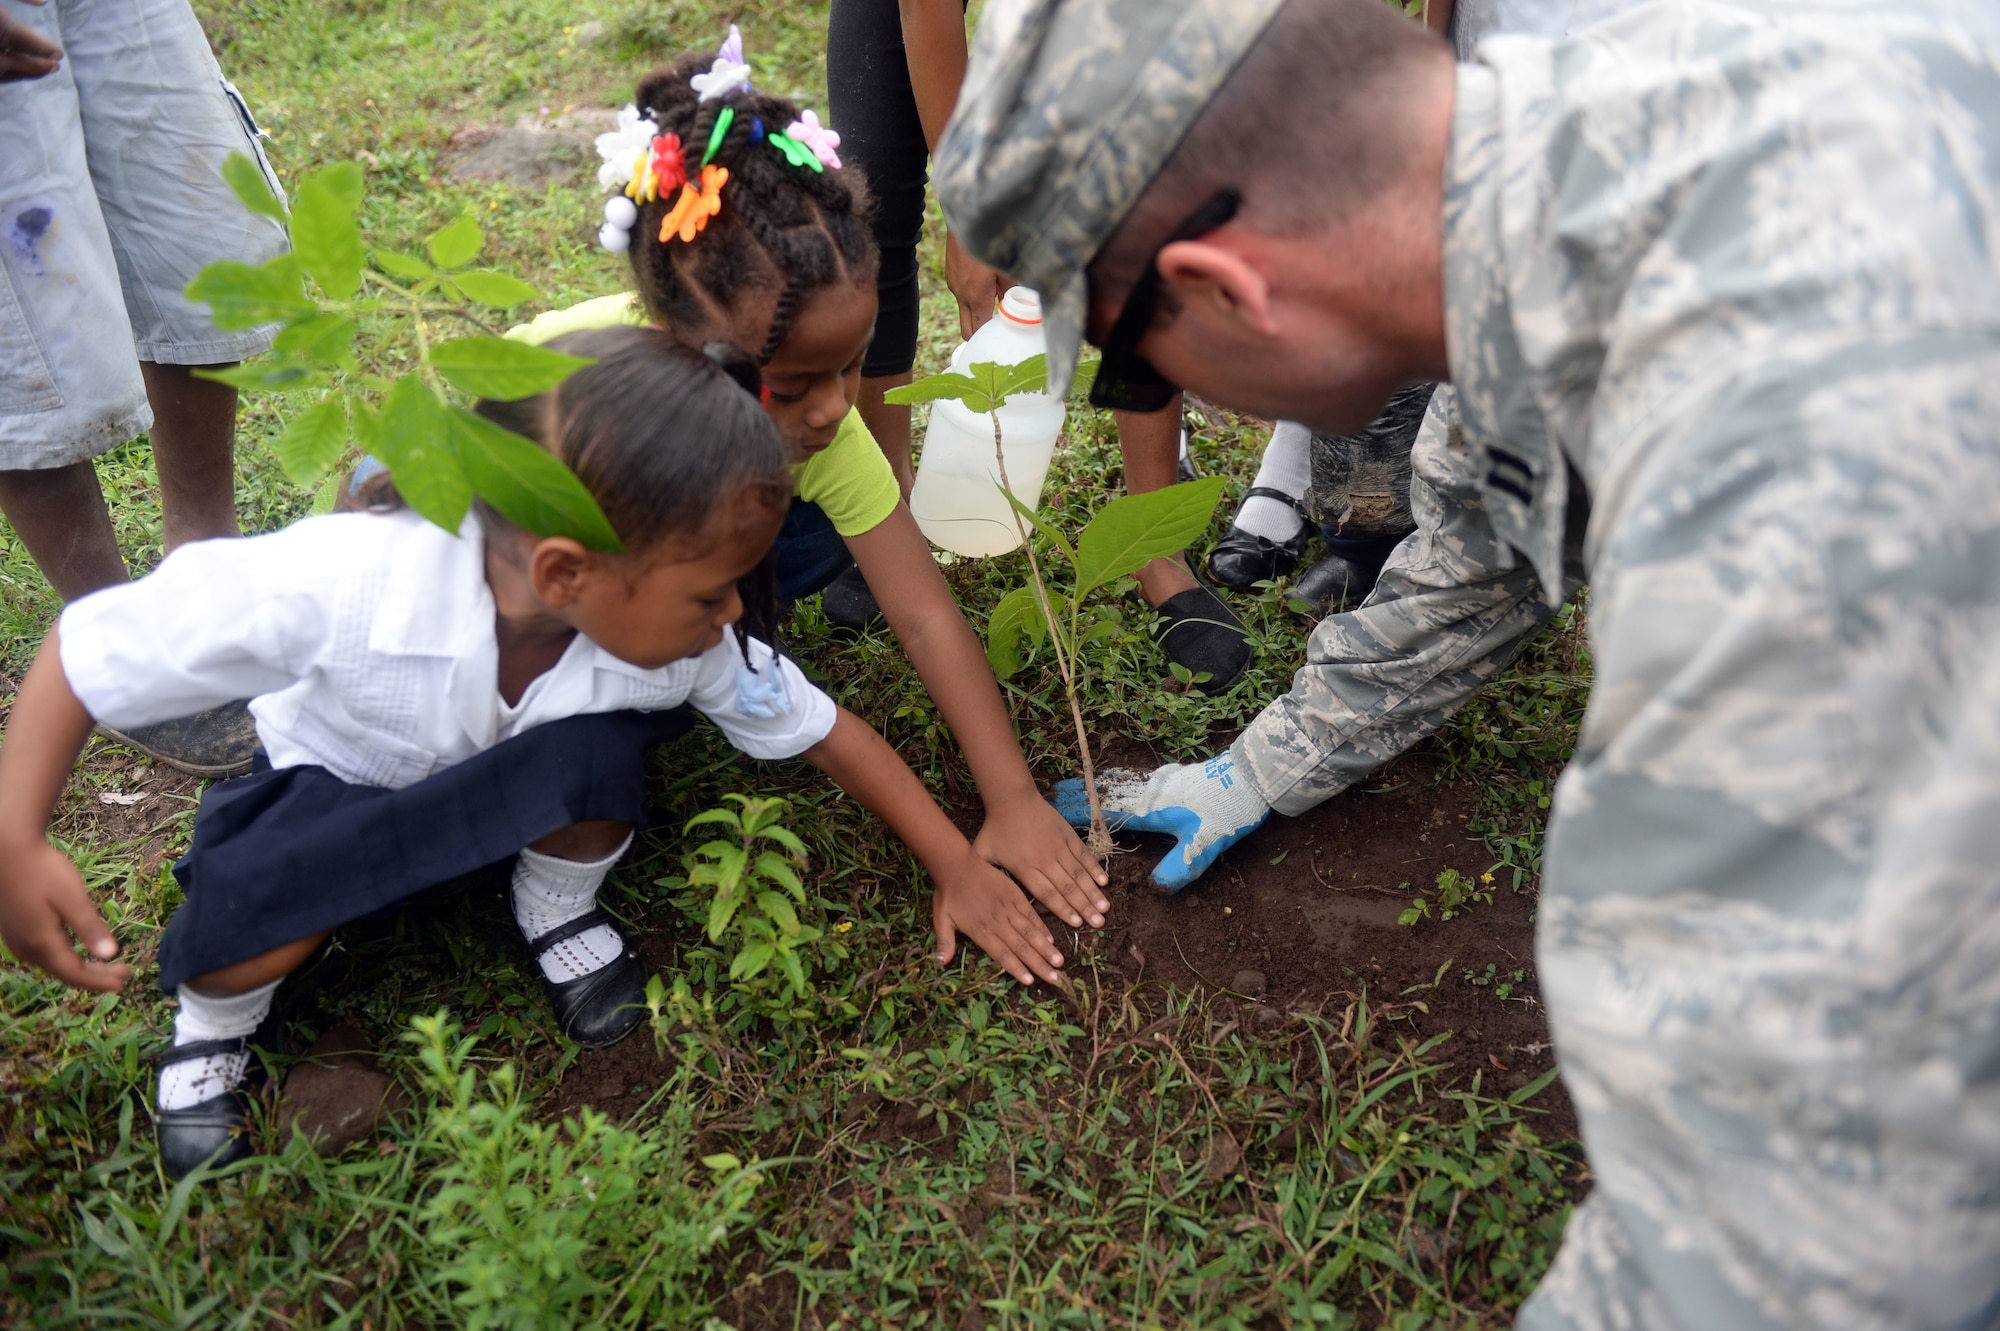 U.S. Air Force Capt. Austin McKinney, 12th Air Force assessments officer in charge, helps students plant trees during the National Tree Day celebration at Rafeal Peneda Ponce School in Trujillo, Honduras, June 19, 2015. McKinney is a member of the NEW HORIZONS Honduras 2015 training exercise which is providing support throughout the Trujillo and Tocoa regions of Honduras by building a new two-classroom schoolhouse in Ocotes Alto, drilling a well in Honduras Aguan, and proving general medical support. NEW HORIZONS was launched in the 1980s and is an annual joint humanitarian assistance exercise that U.S. Southern Command conducts with a partner nation in Central America, South America or the Caribbean. The exercise improves joint training readiness of U.S. and partner nation civil engineers, medical professionals and support personnel through humanitarian assistance activities. (U.S. Air Force photo by Capt. David J. Murphy/Released)